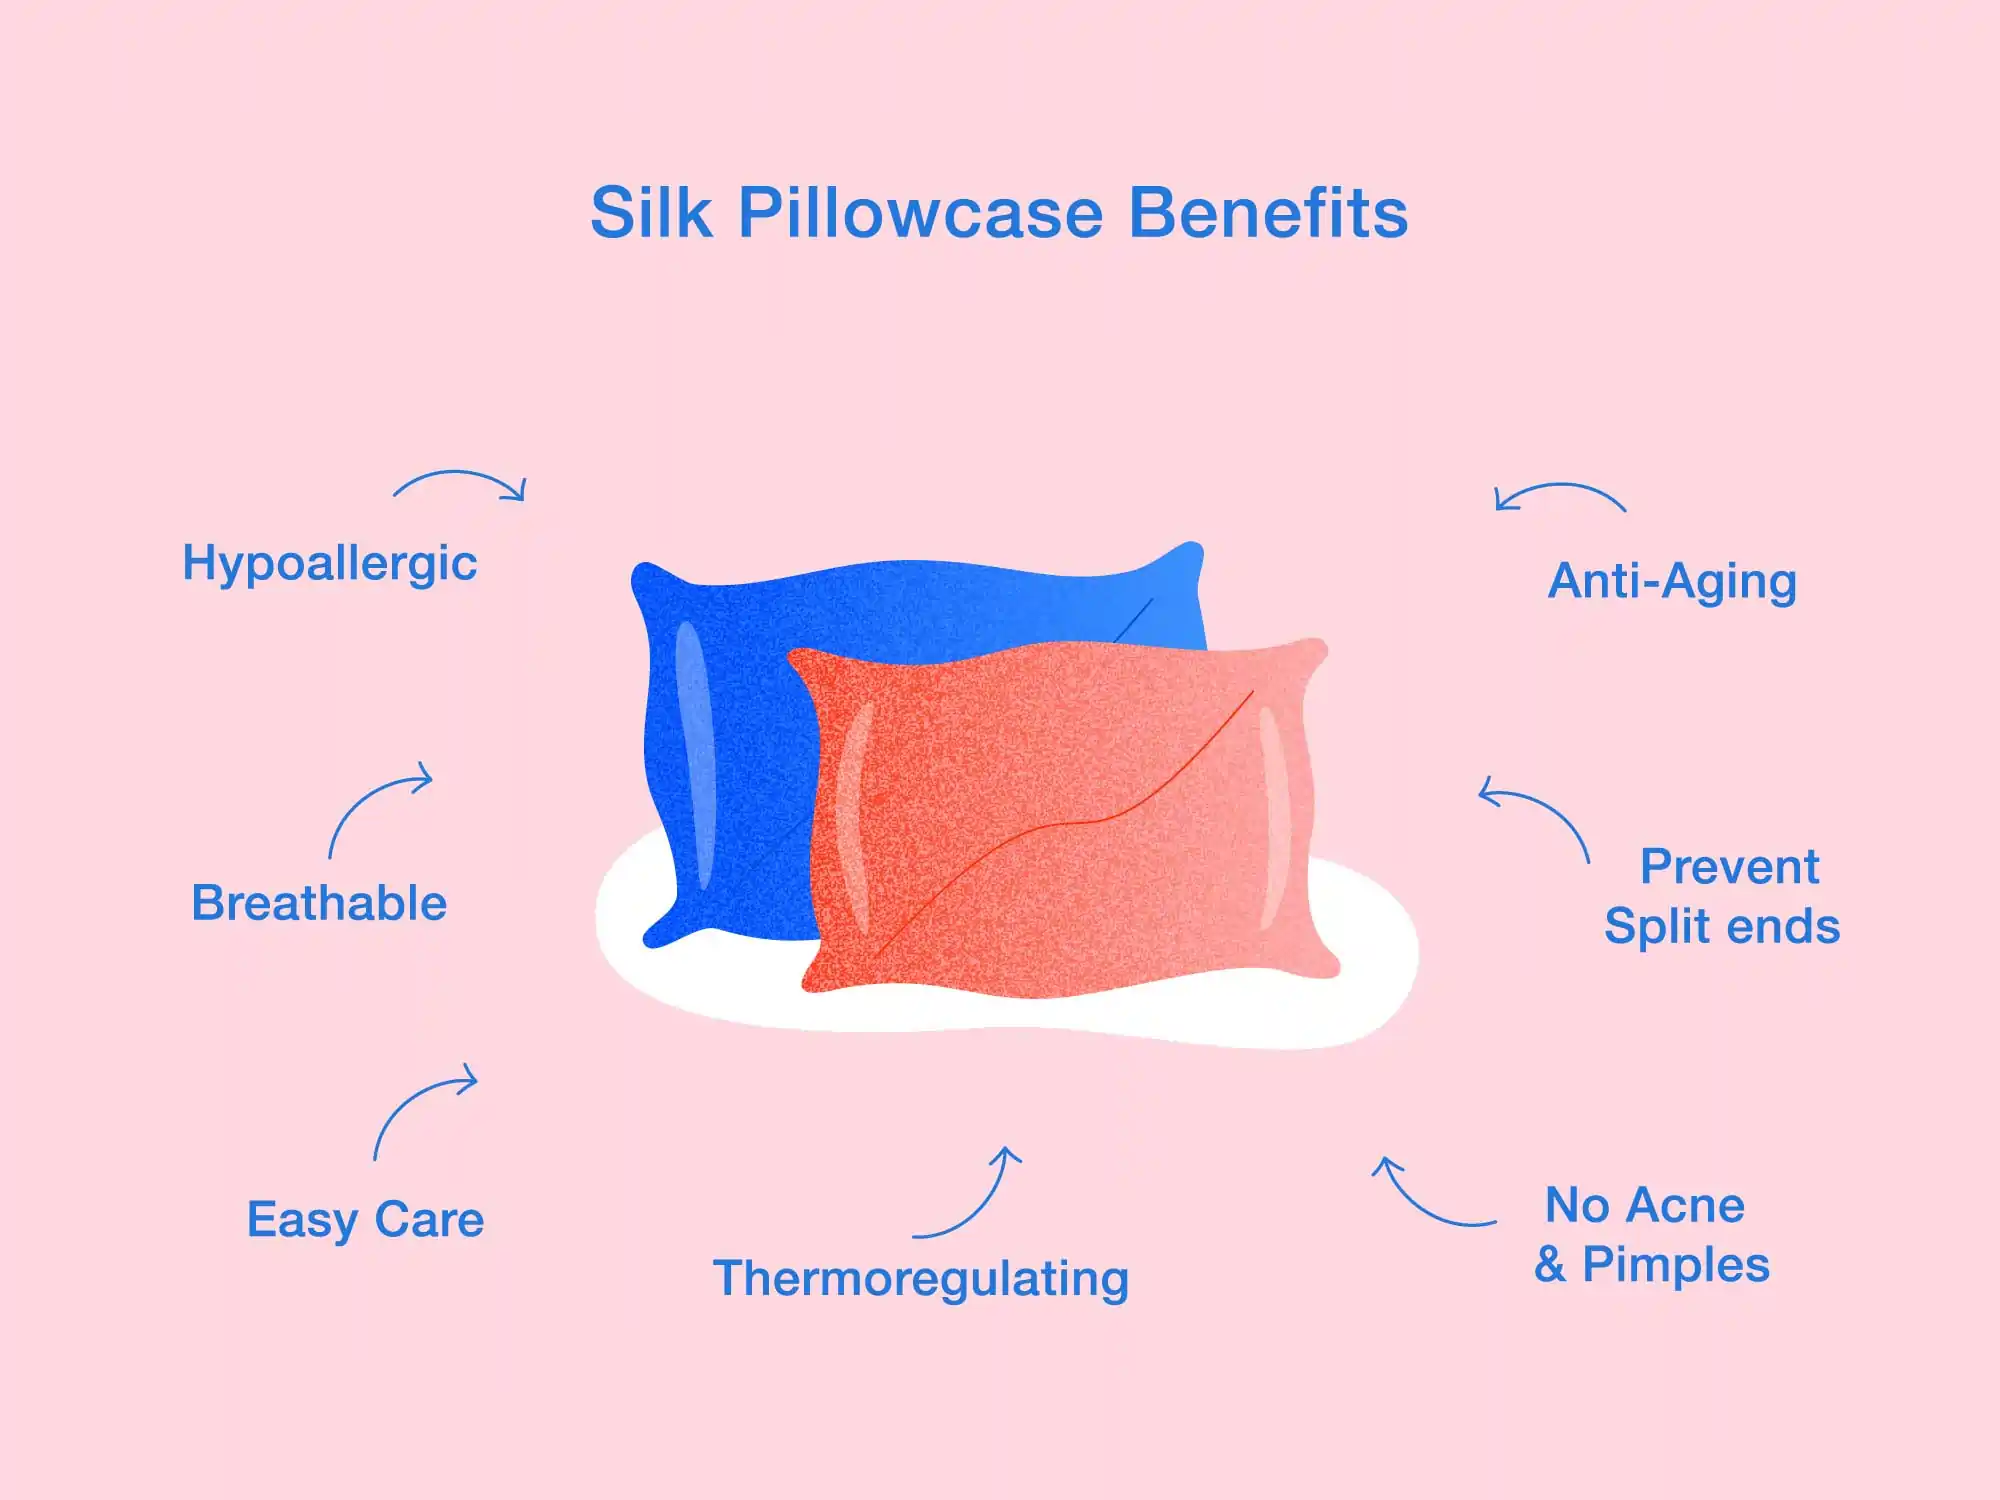 10 Silk Pillowcase Benefits for Skin and Hair, According to Dermatologists